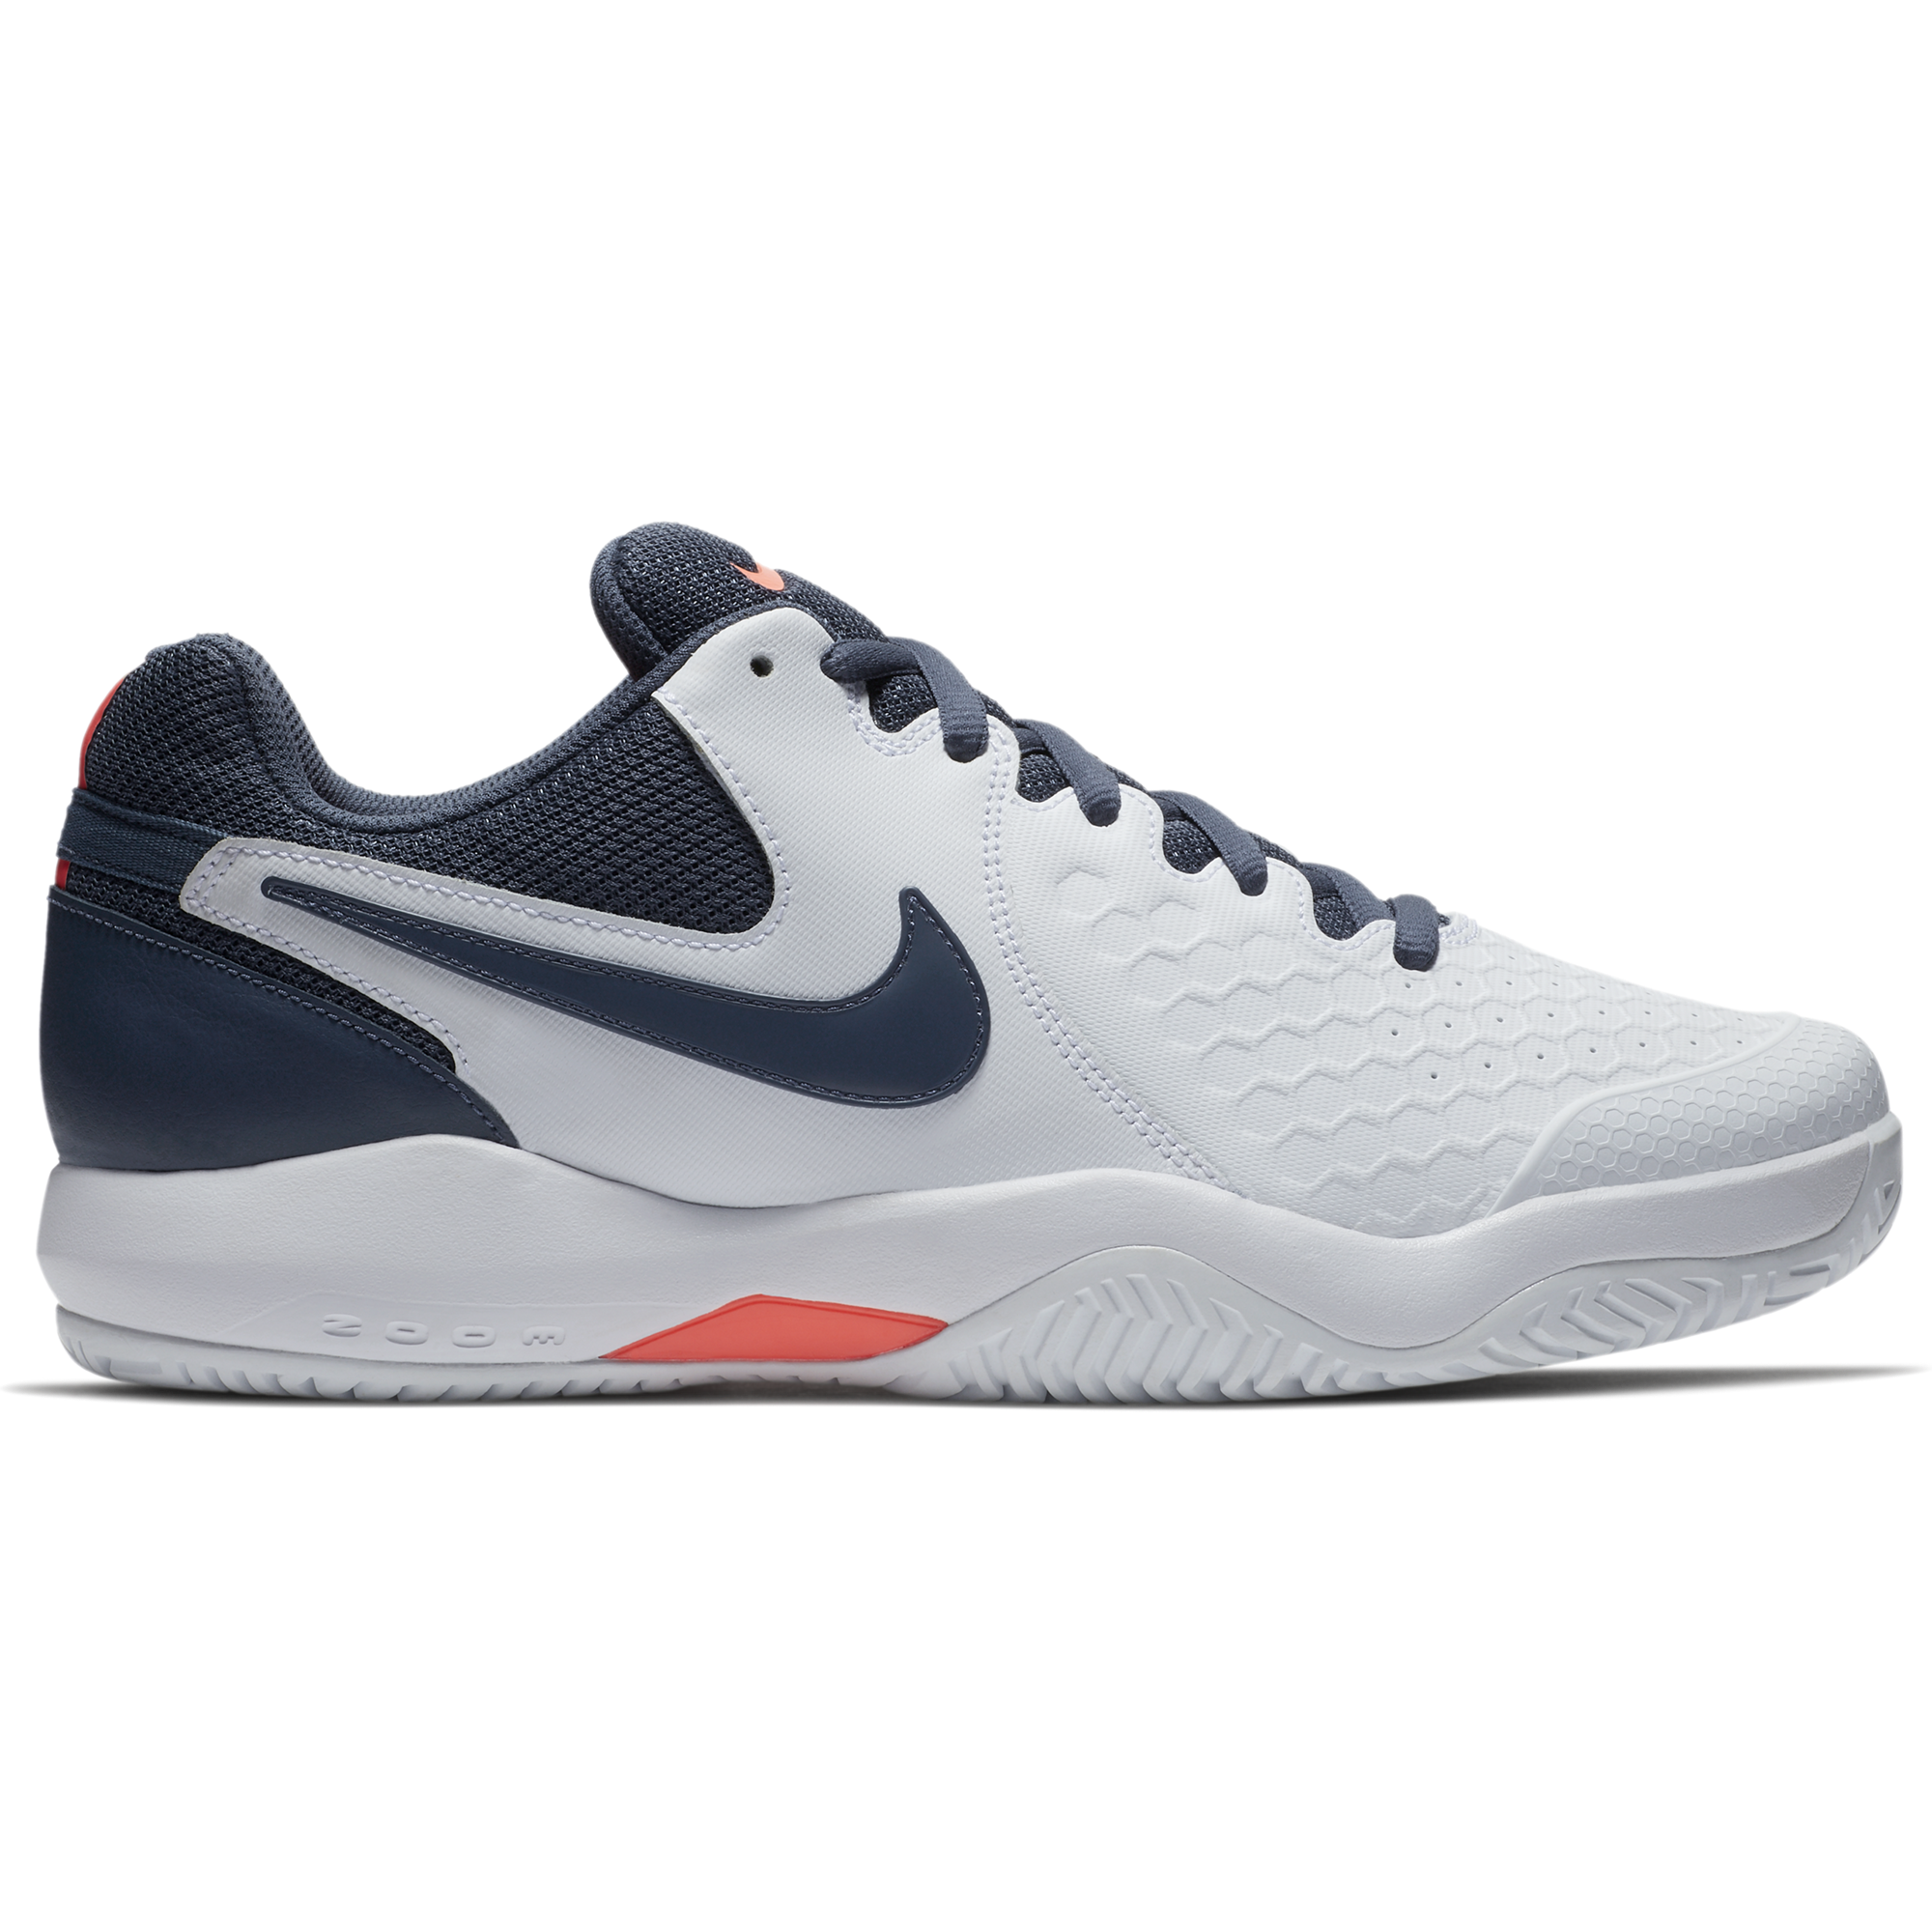 nike court air zoom resistance tennis shoes mens